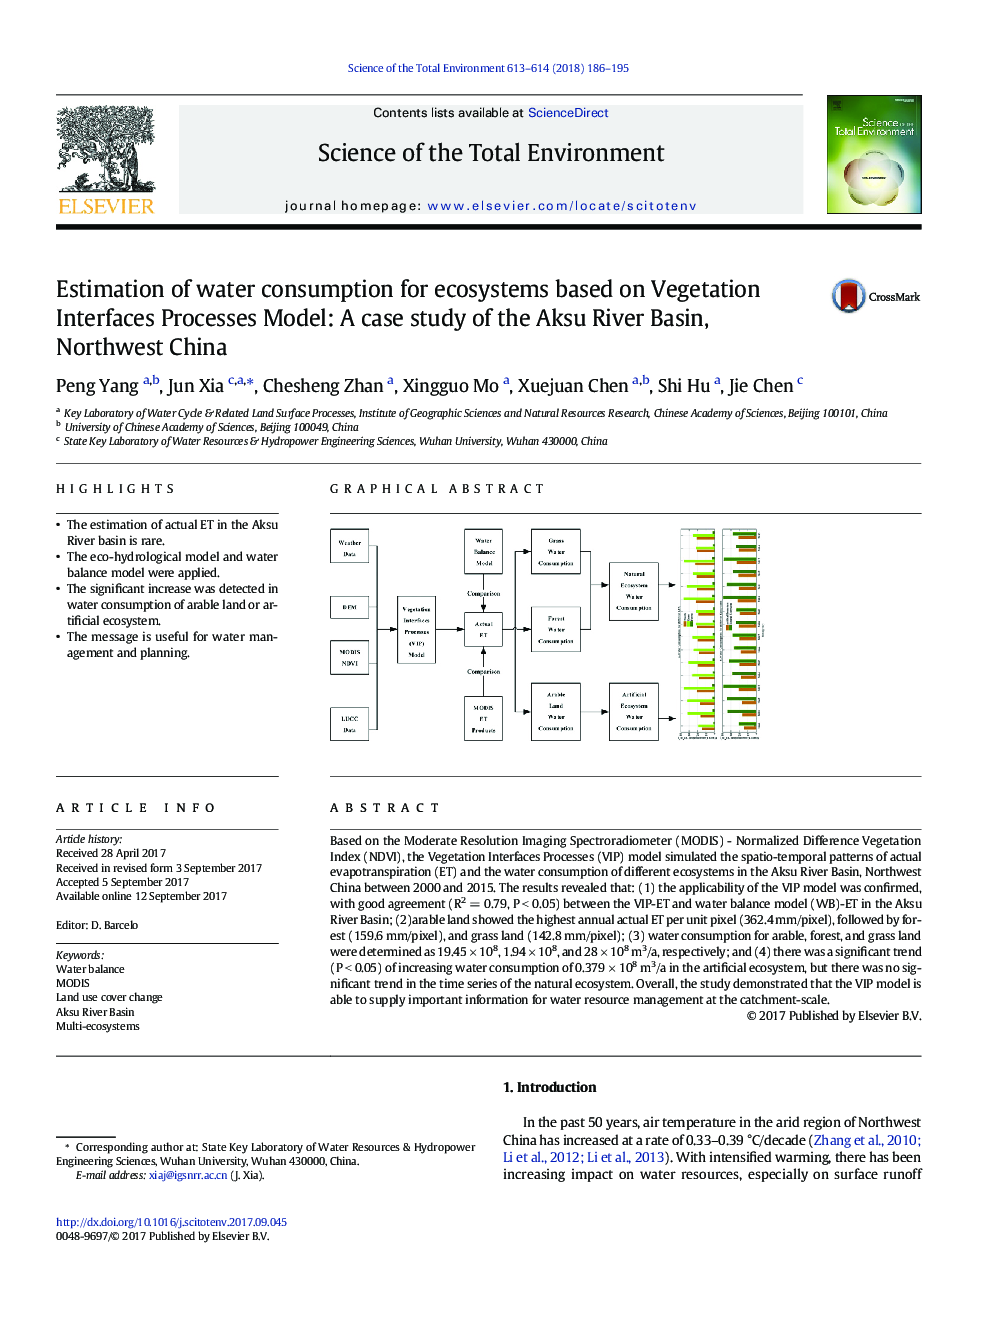 Estimation of water consumption for ecosystems based on Vegetation Interfaces Processes Model: A case study of the Aksu River Basin, Northwest China